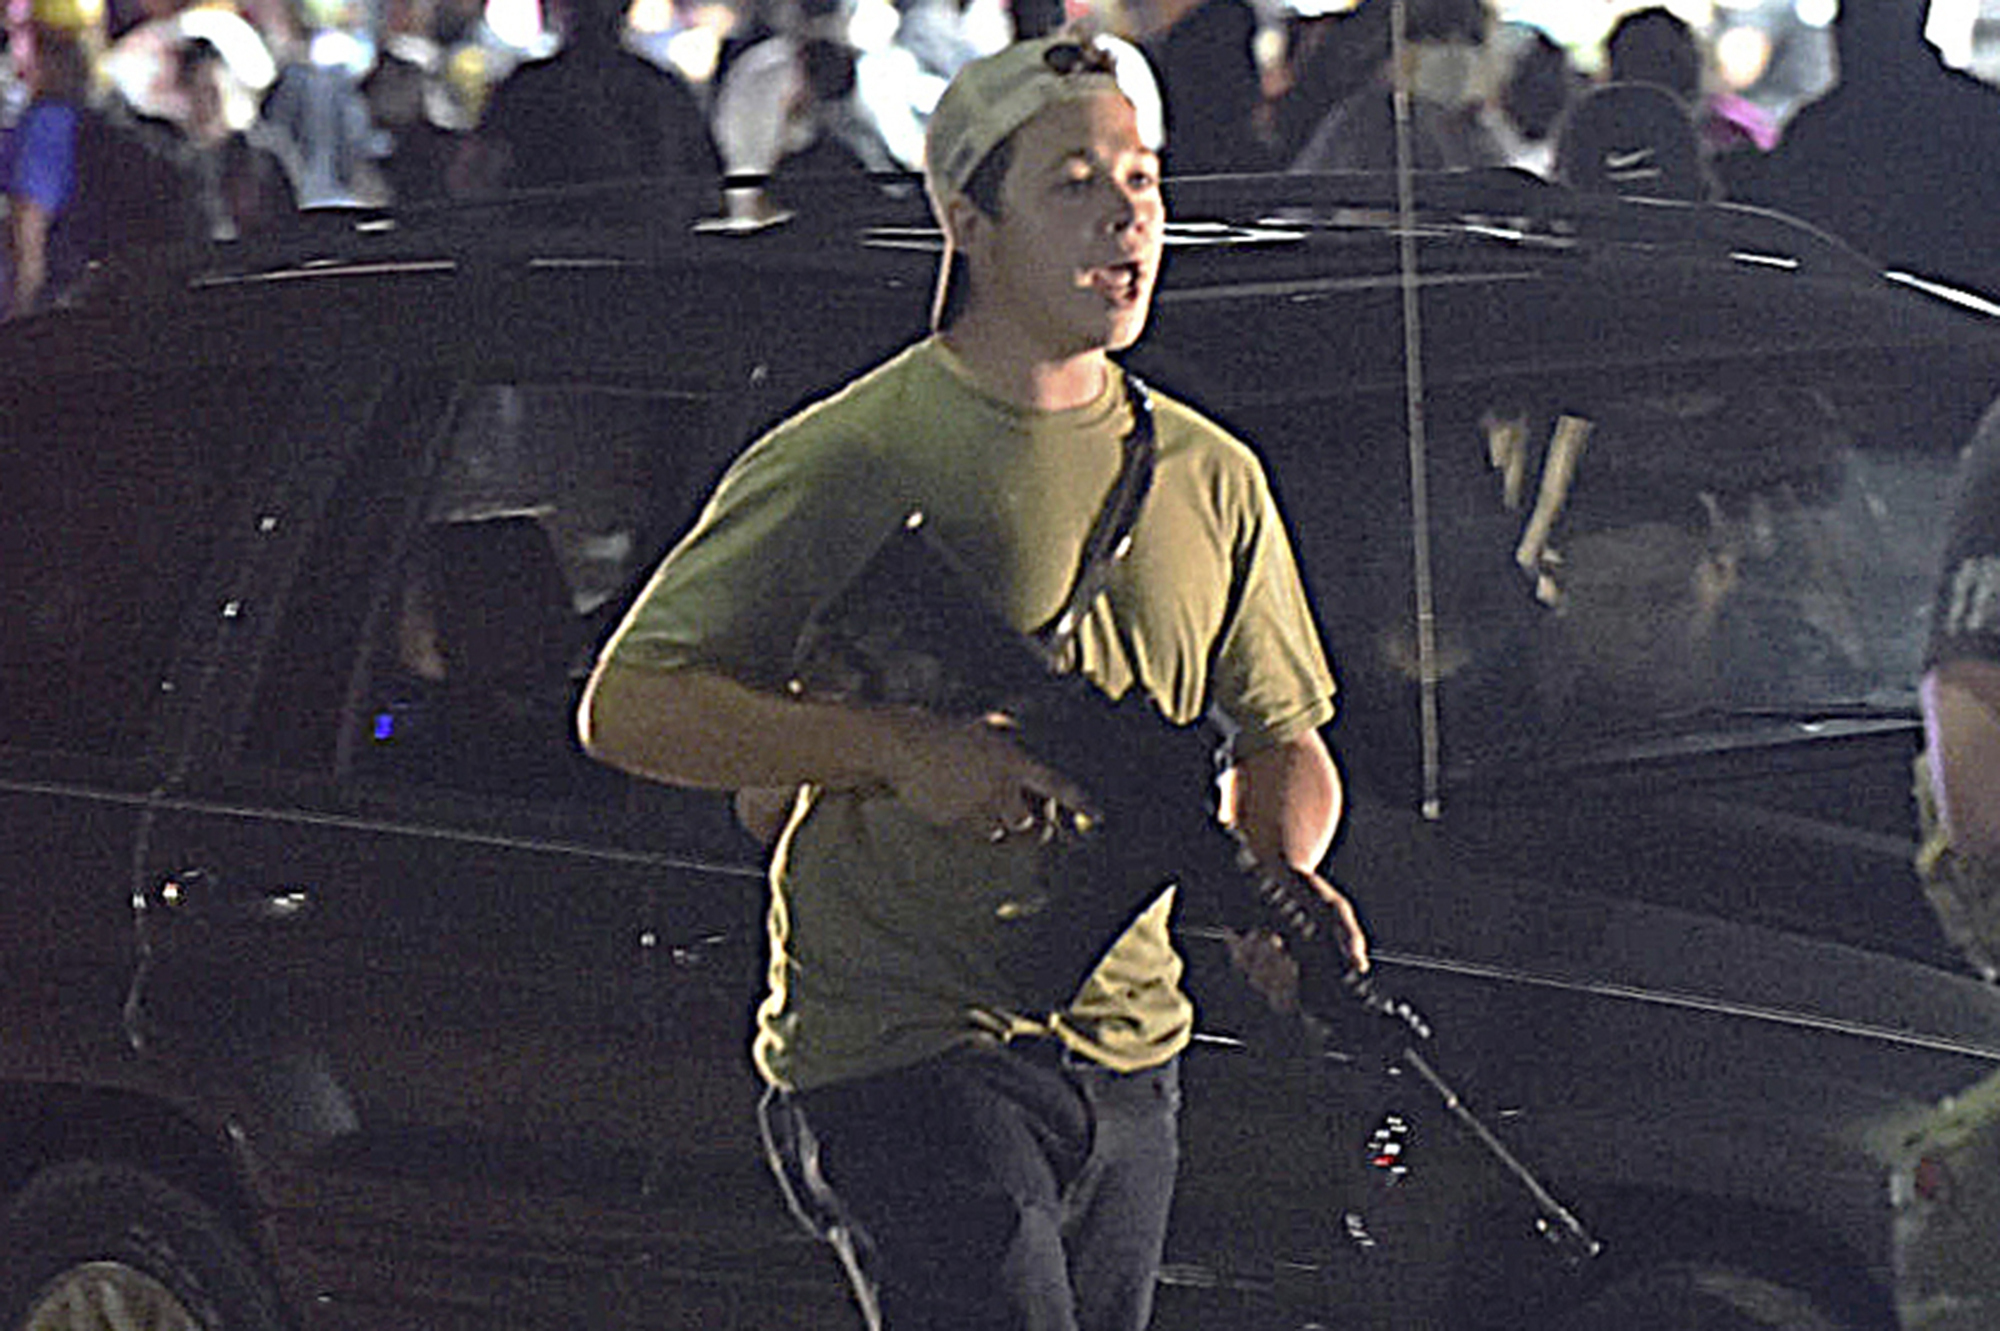 Kyle Rittenhouse carries a weapon in Kenosha, Wisconsin, on August 25 2020 during a night of unrest following the police shooting of Jacob Blake